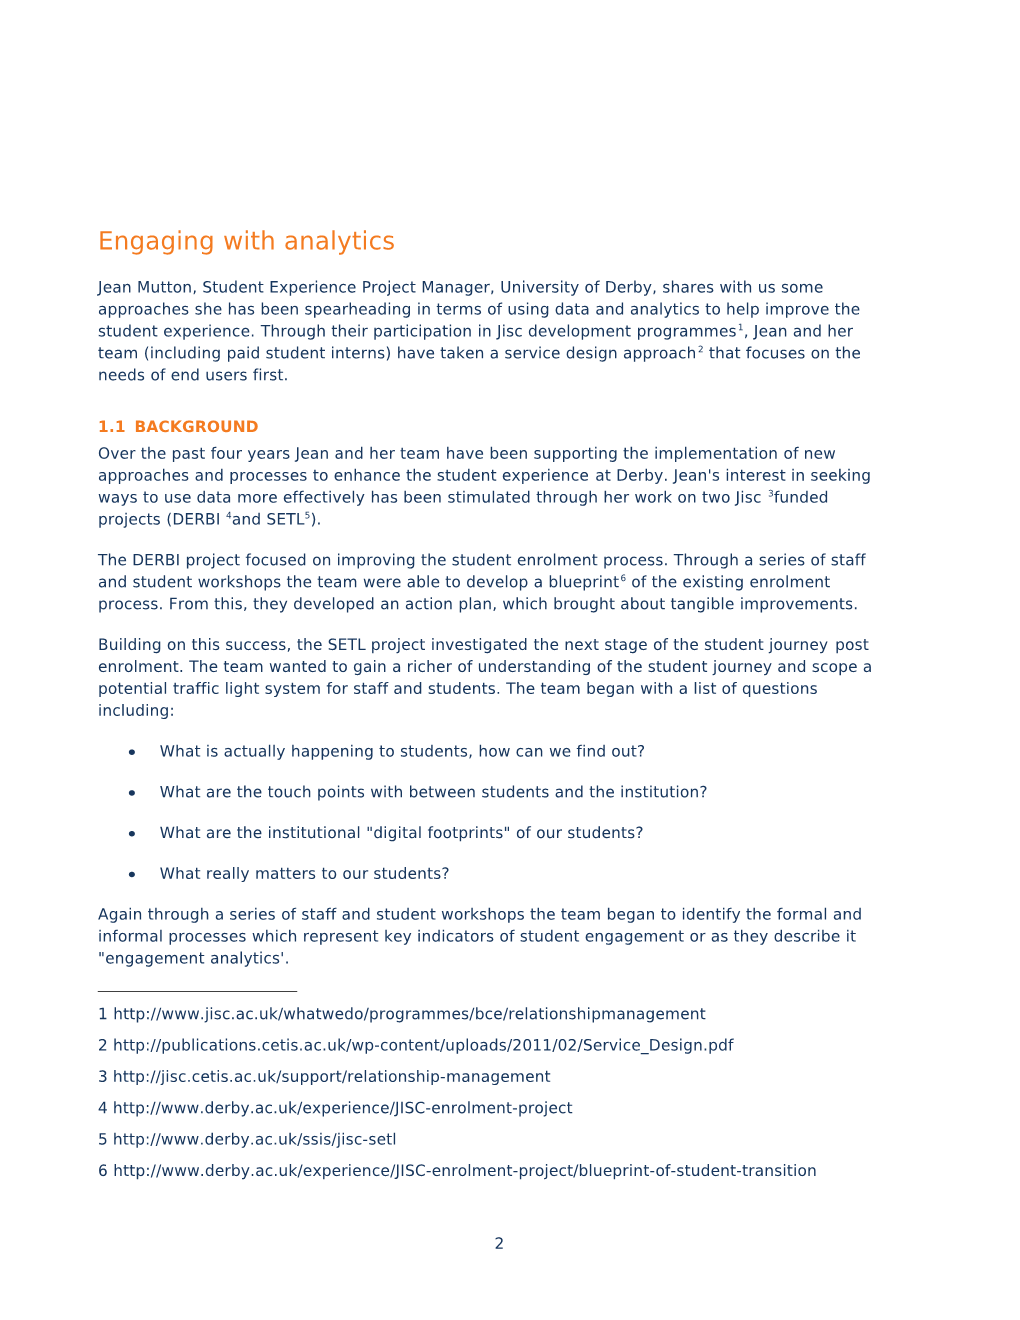 Case Study: Engaging with Analytics